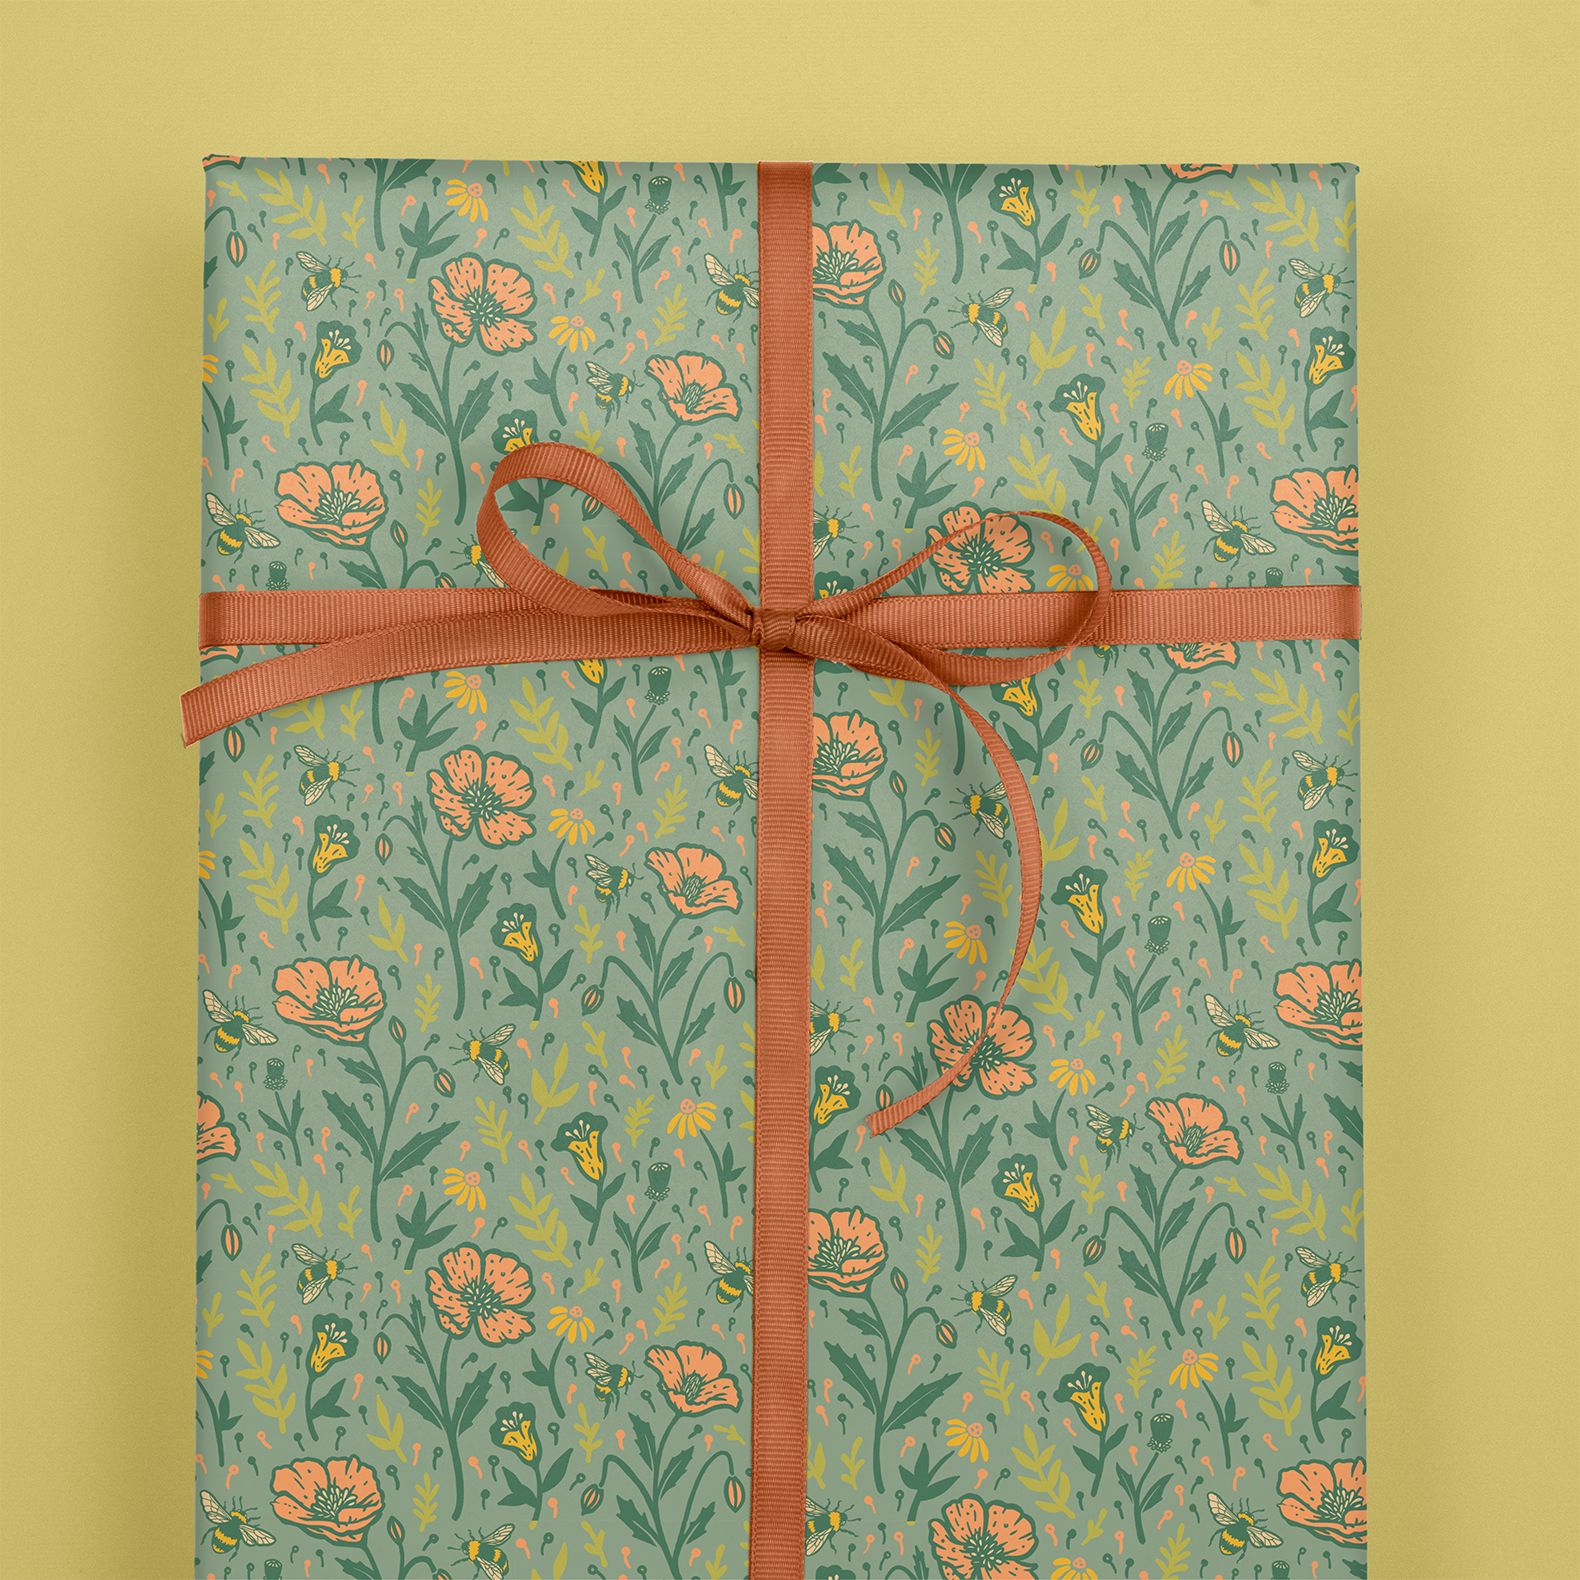 Recyclable Gift Wrap / Wrapping Paper: Poppies